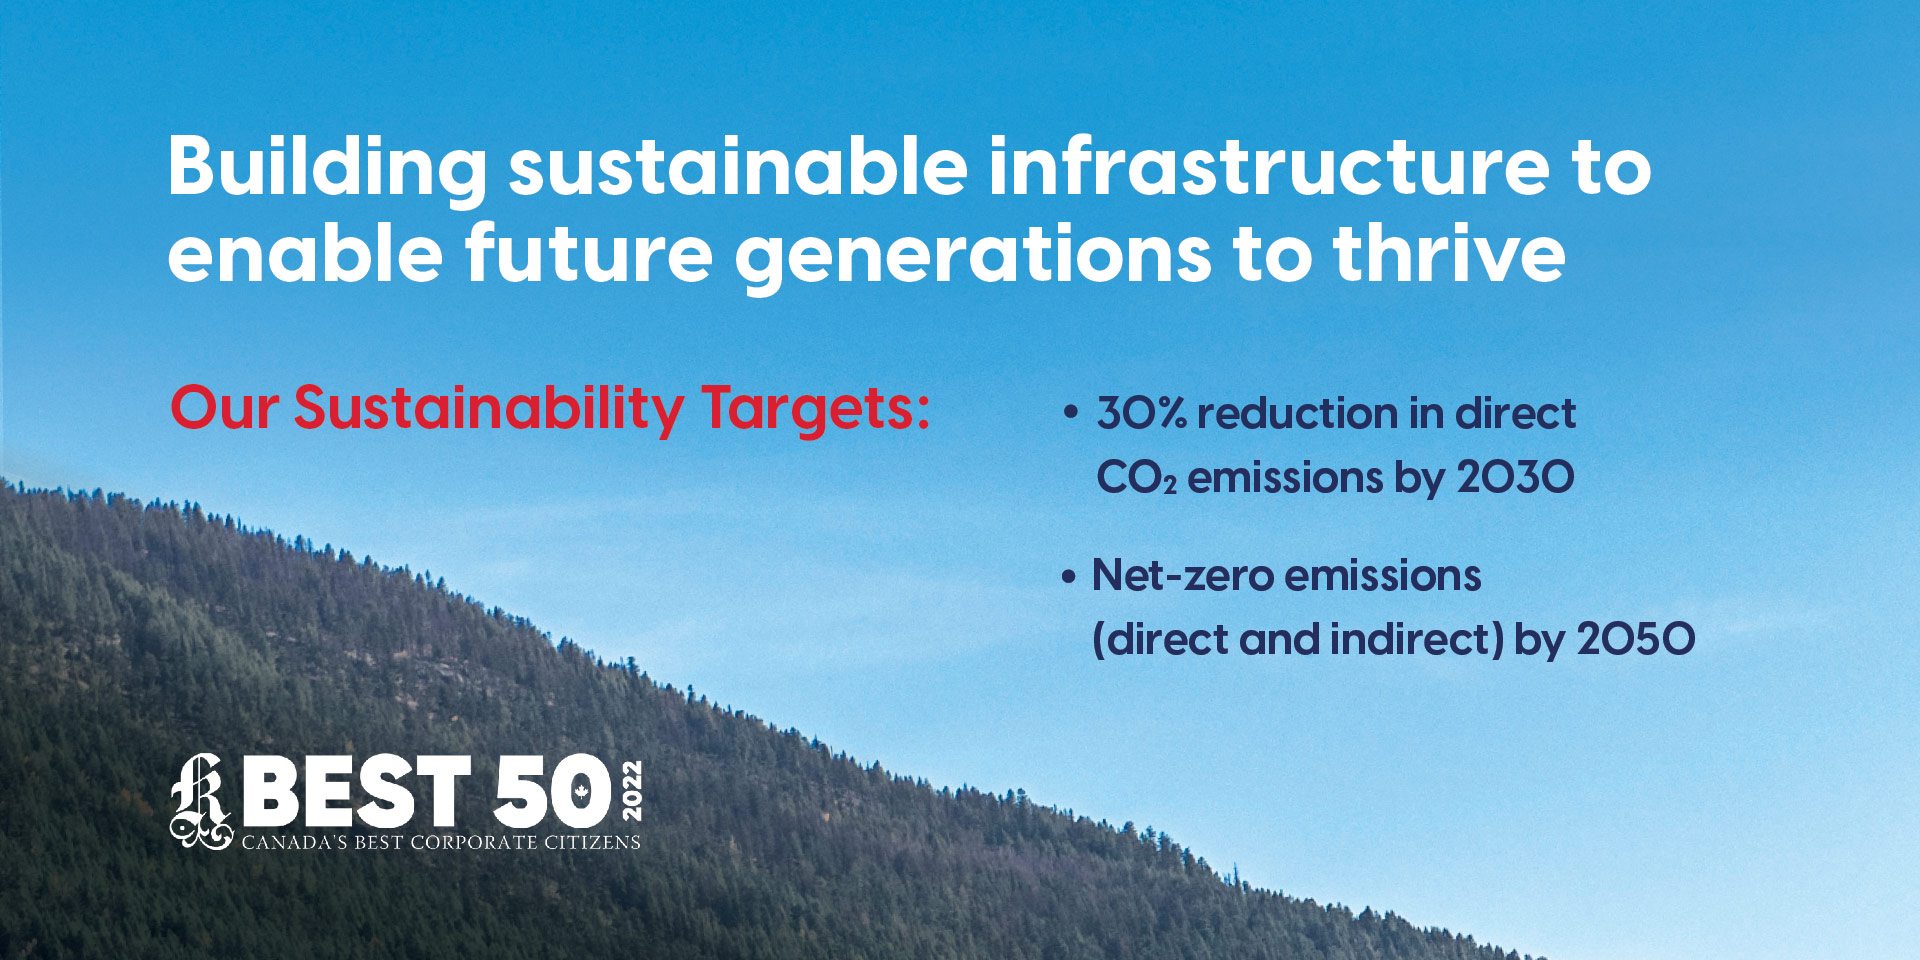 Building sustainable infrastructure to enable future generations to thrive. Our sustainability targets: 30% reduction in direct CO2 emissions by 2030, net-zero emissions (direct and indirect) by 2050